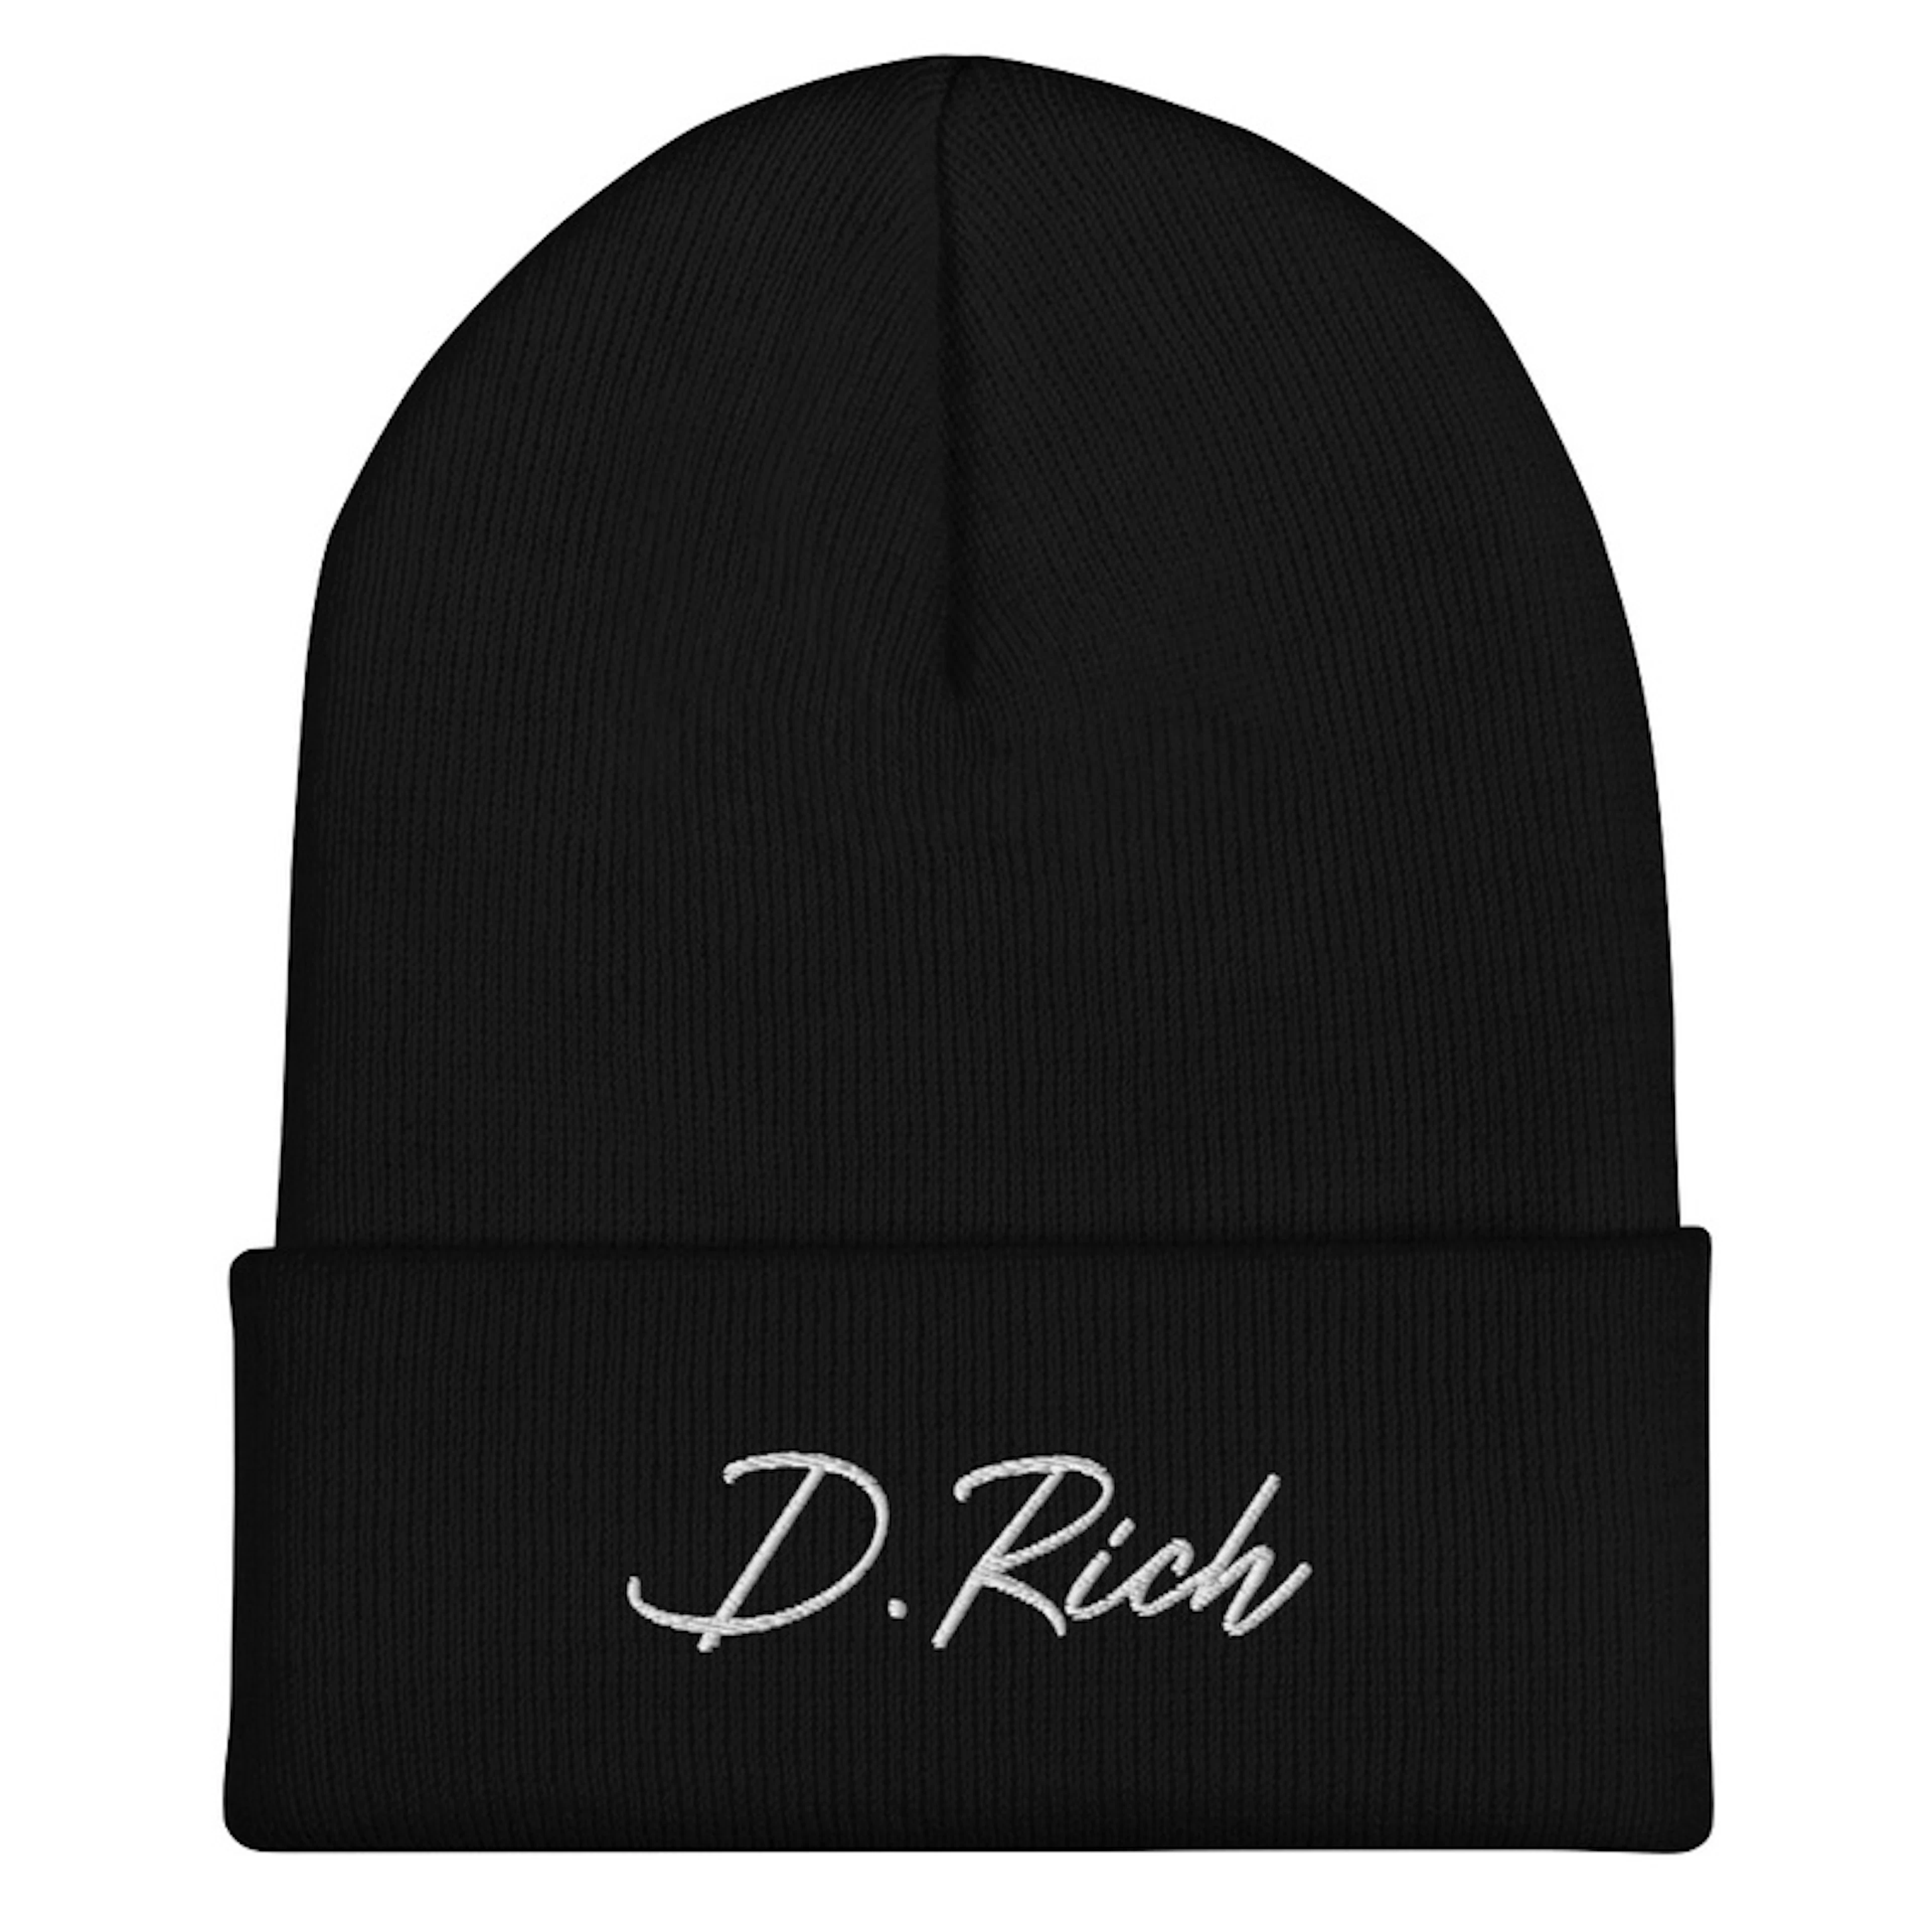 D. Rich logo embroidered knit hat